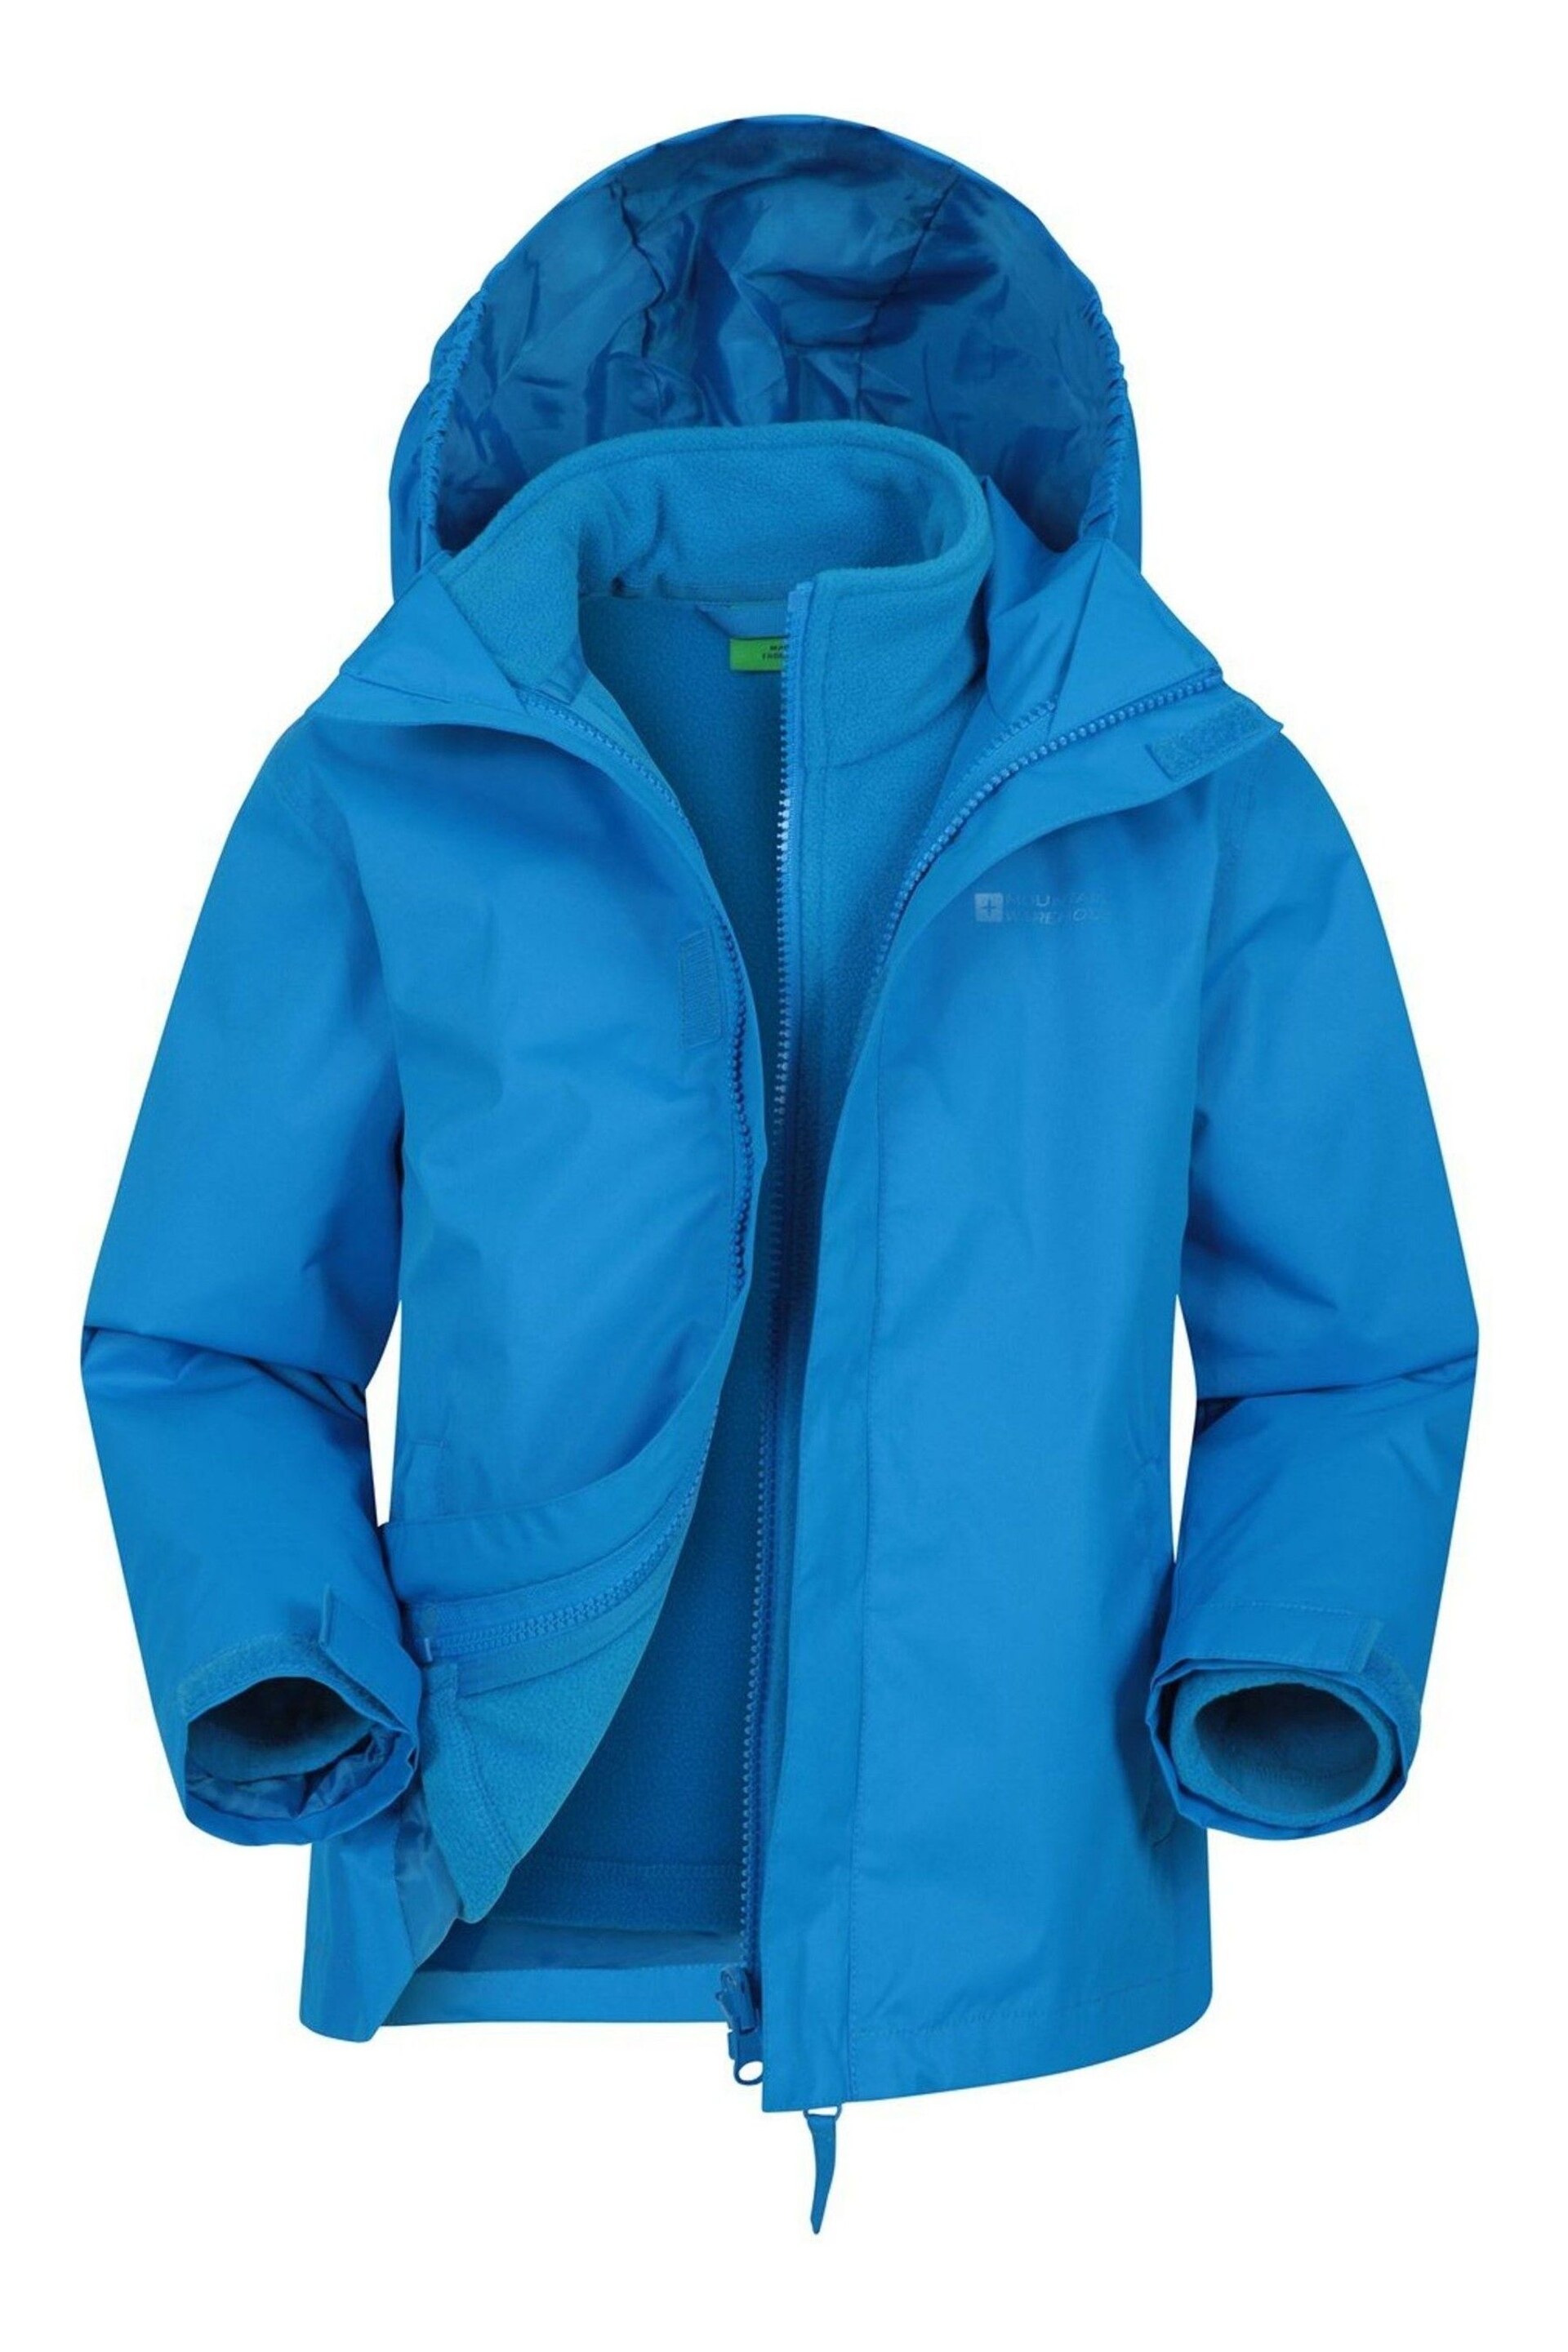 Mountain Warehouse Blue Fell Kids 3 In 1 Water Resistant Jacket - Image 1 of 4